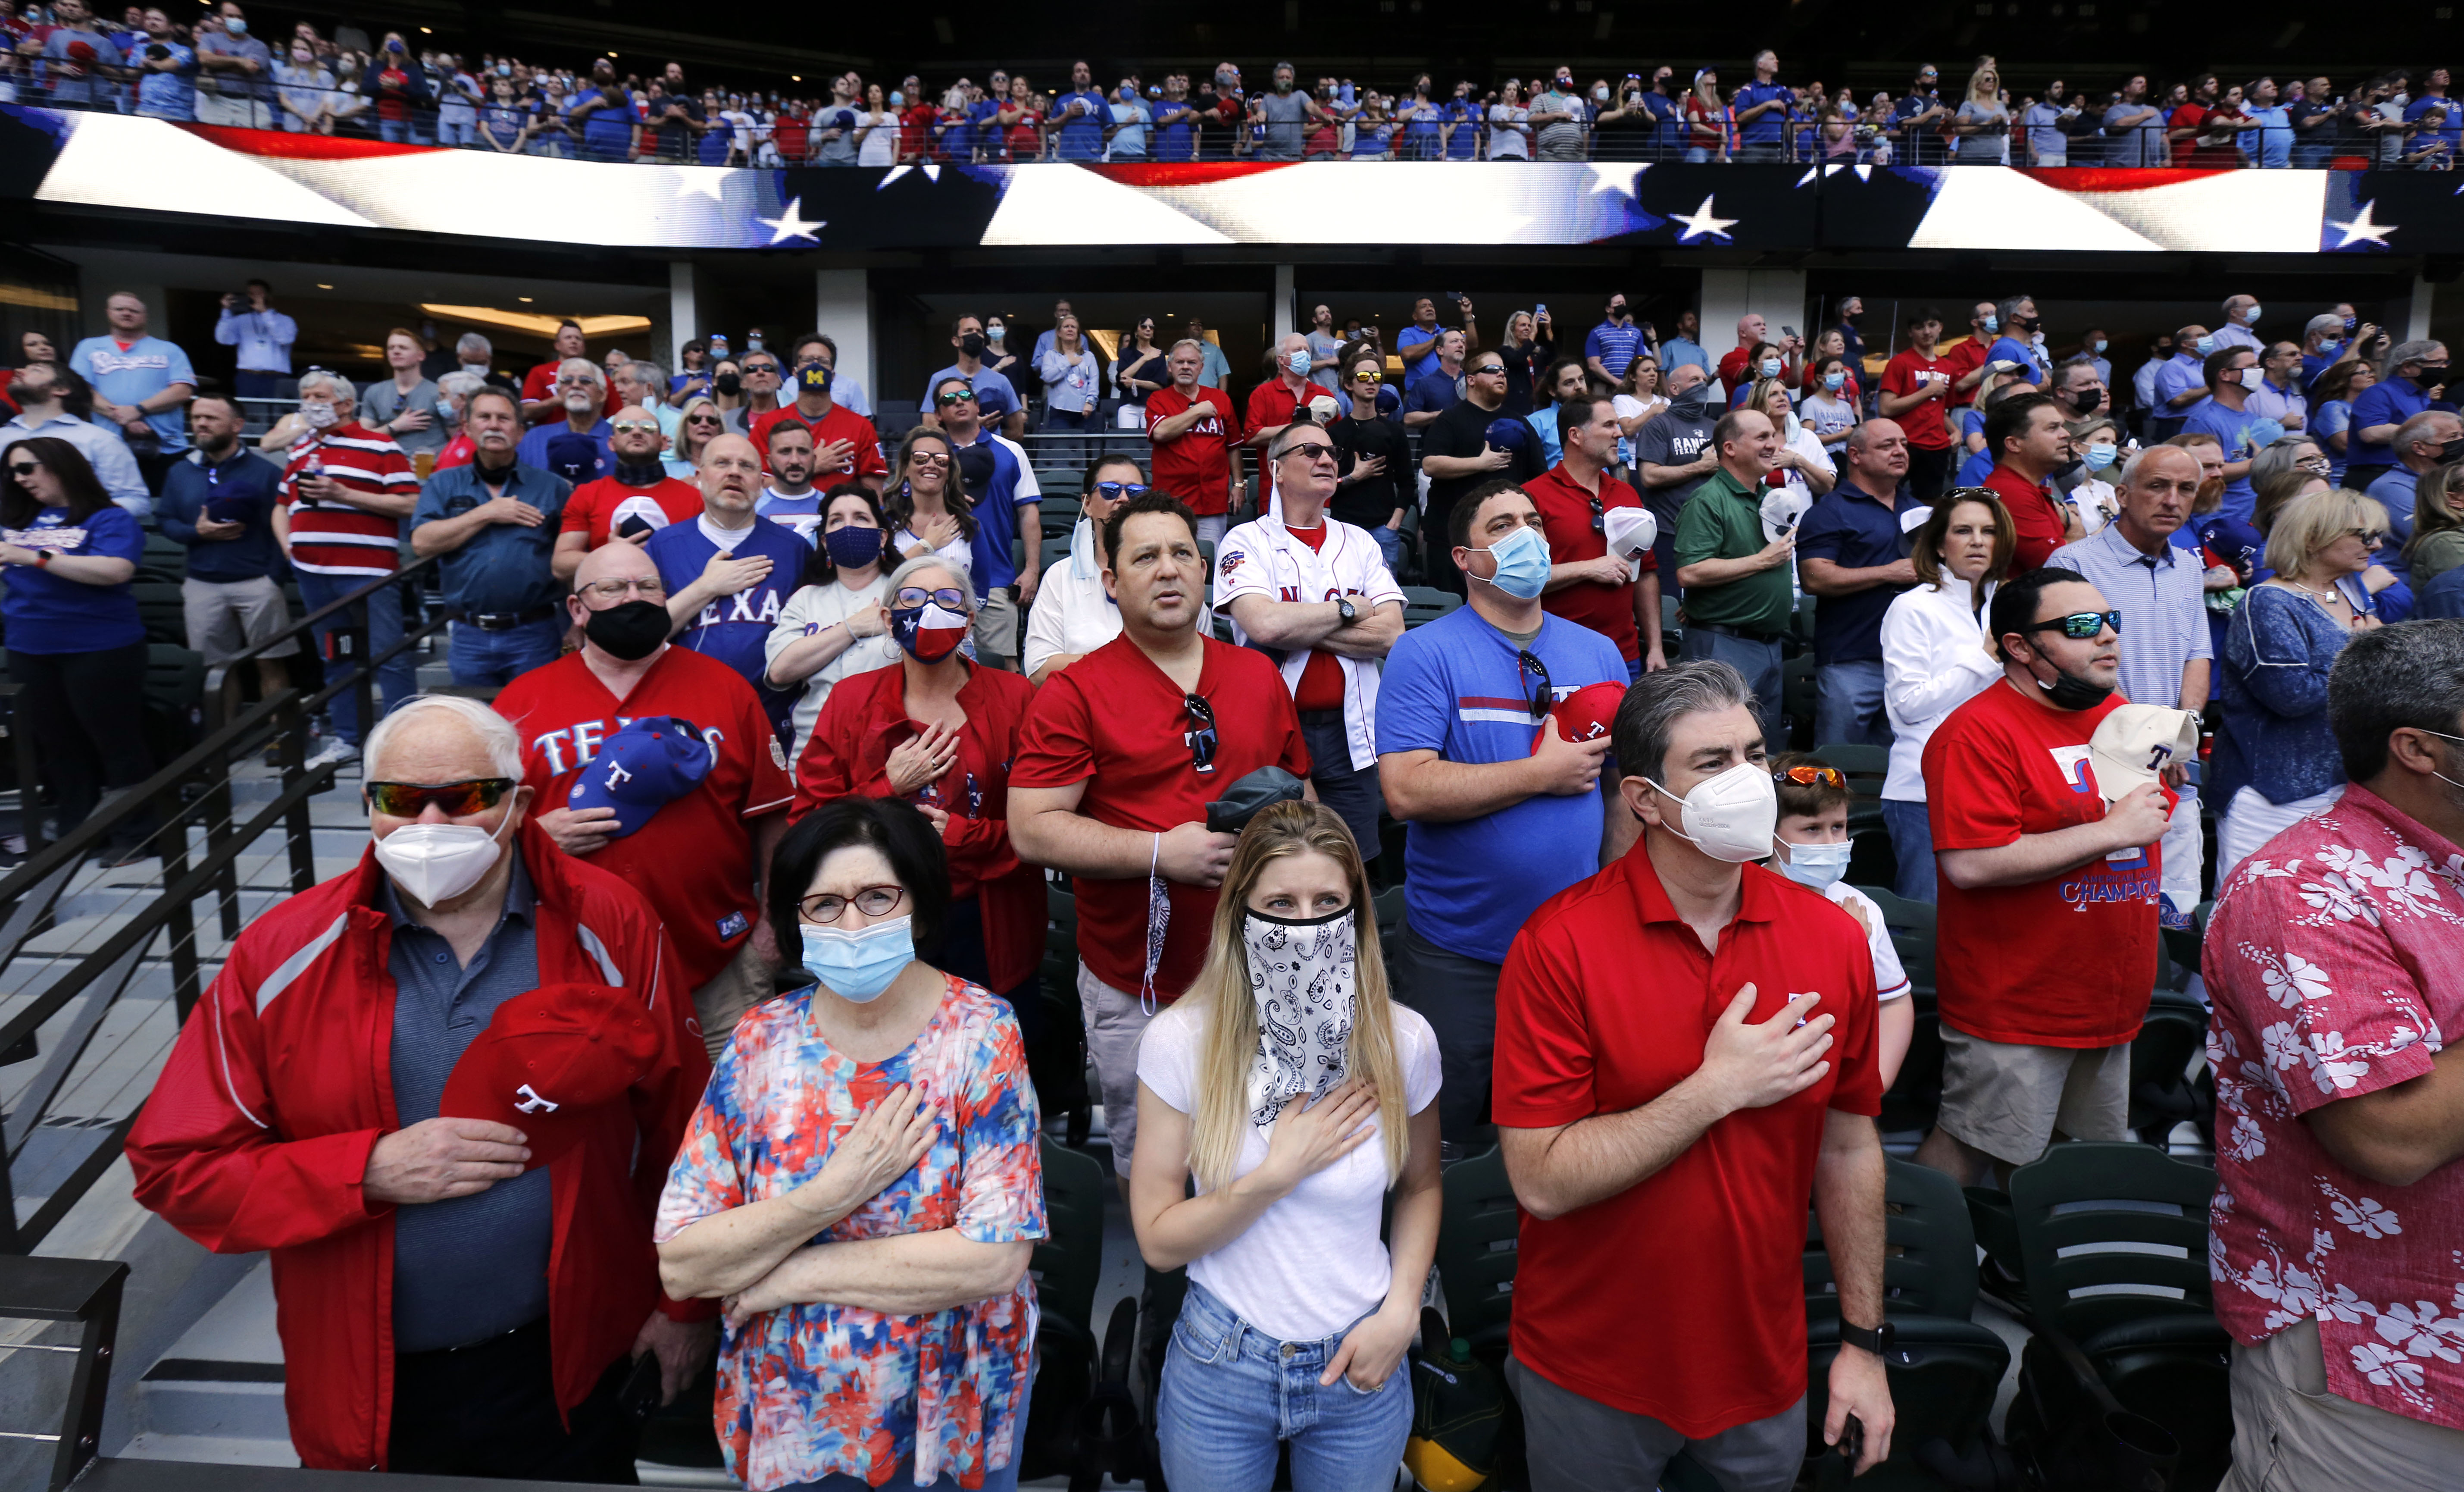 Rangers: Adding Shaded Seating to Globe Life Park Just Wasn't Feasible